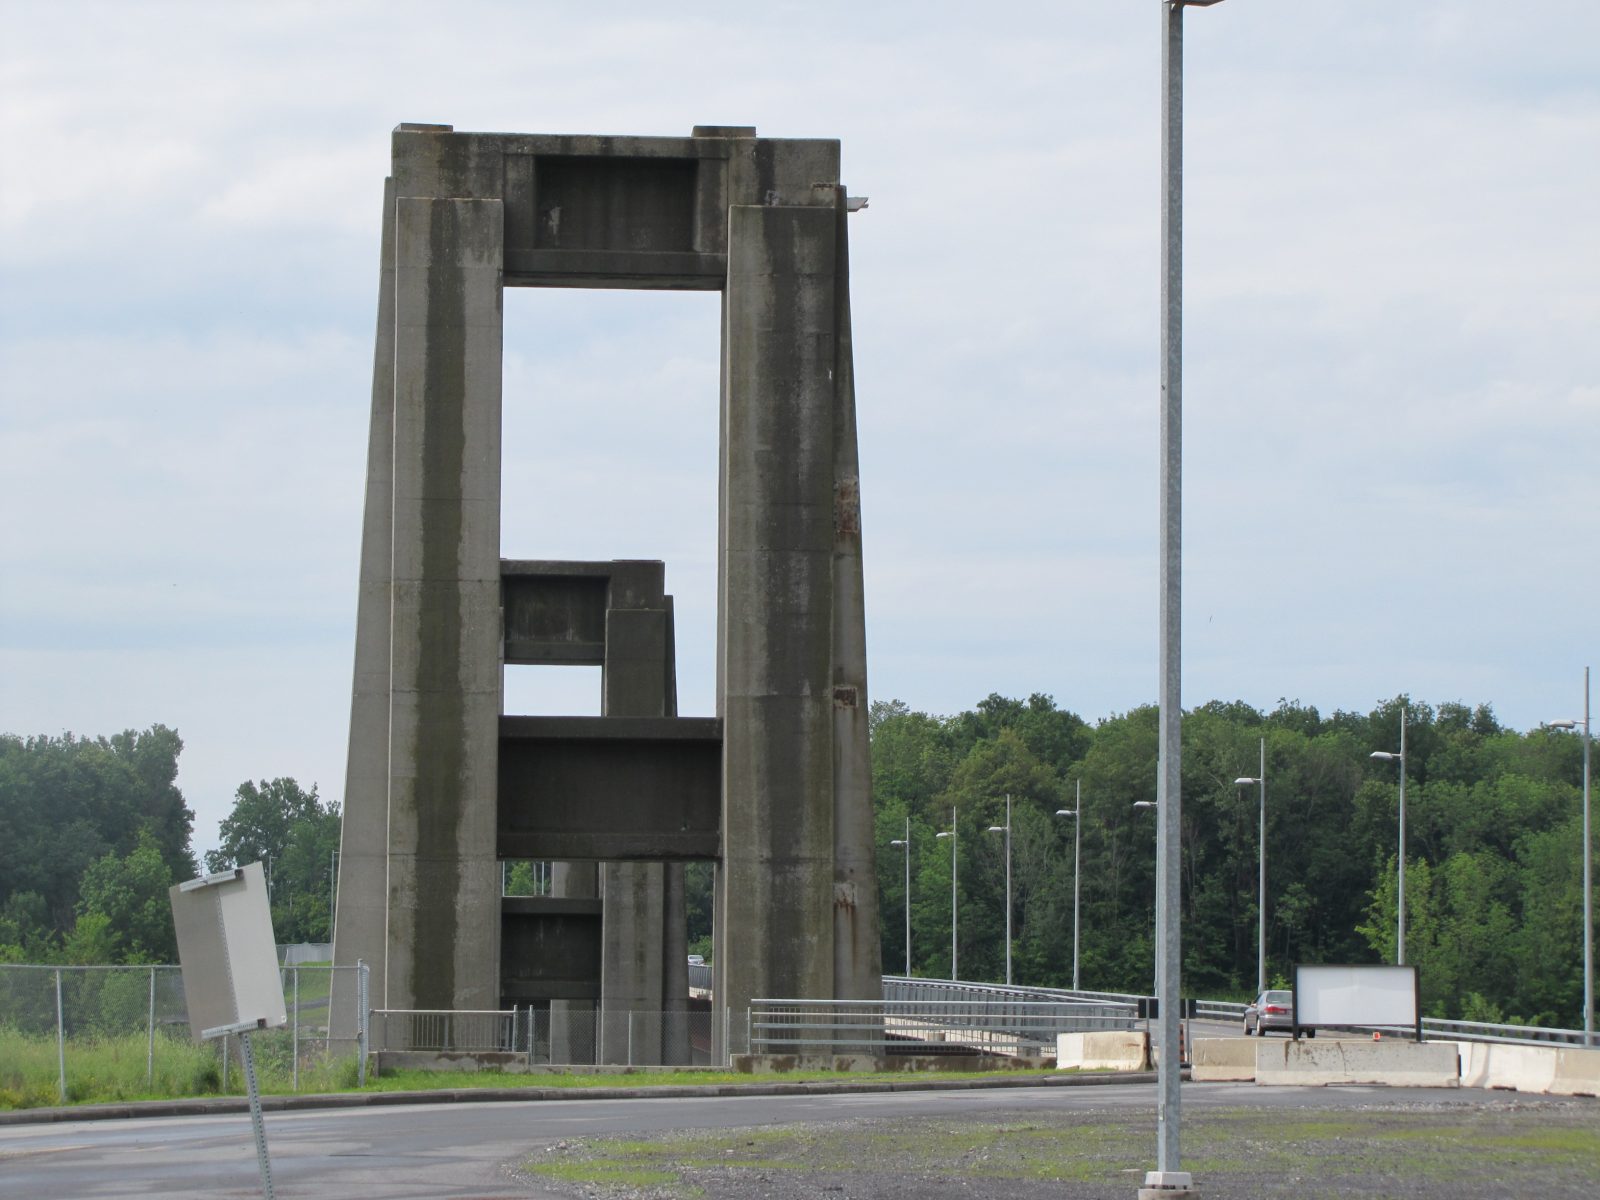 Old bridge piers to be demolished by 2020